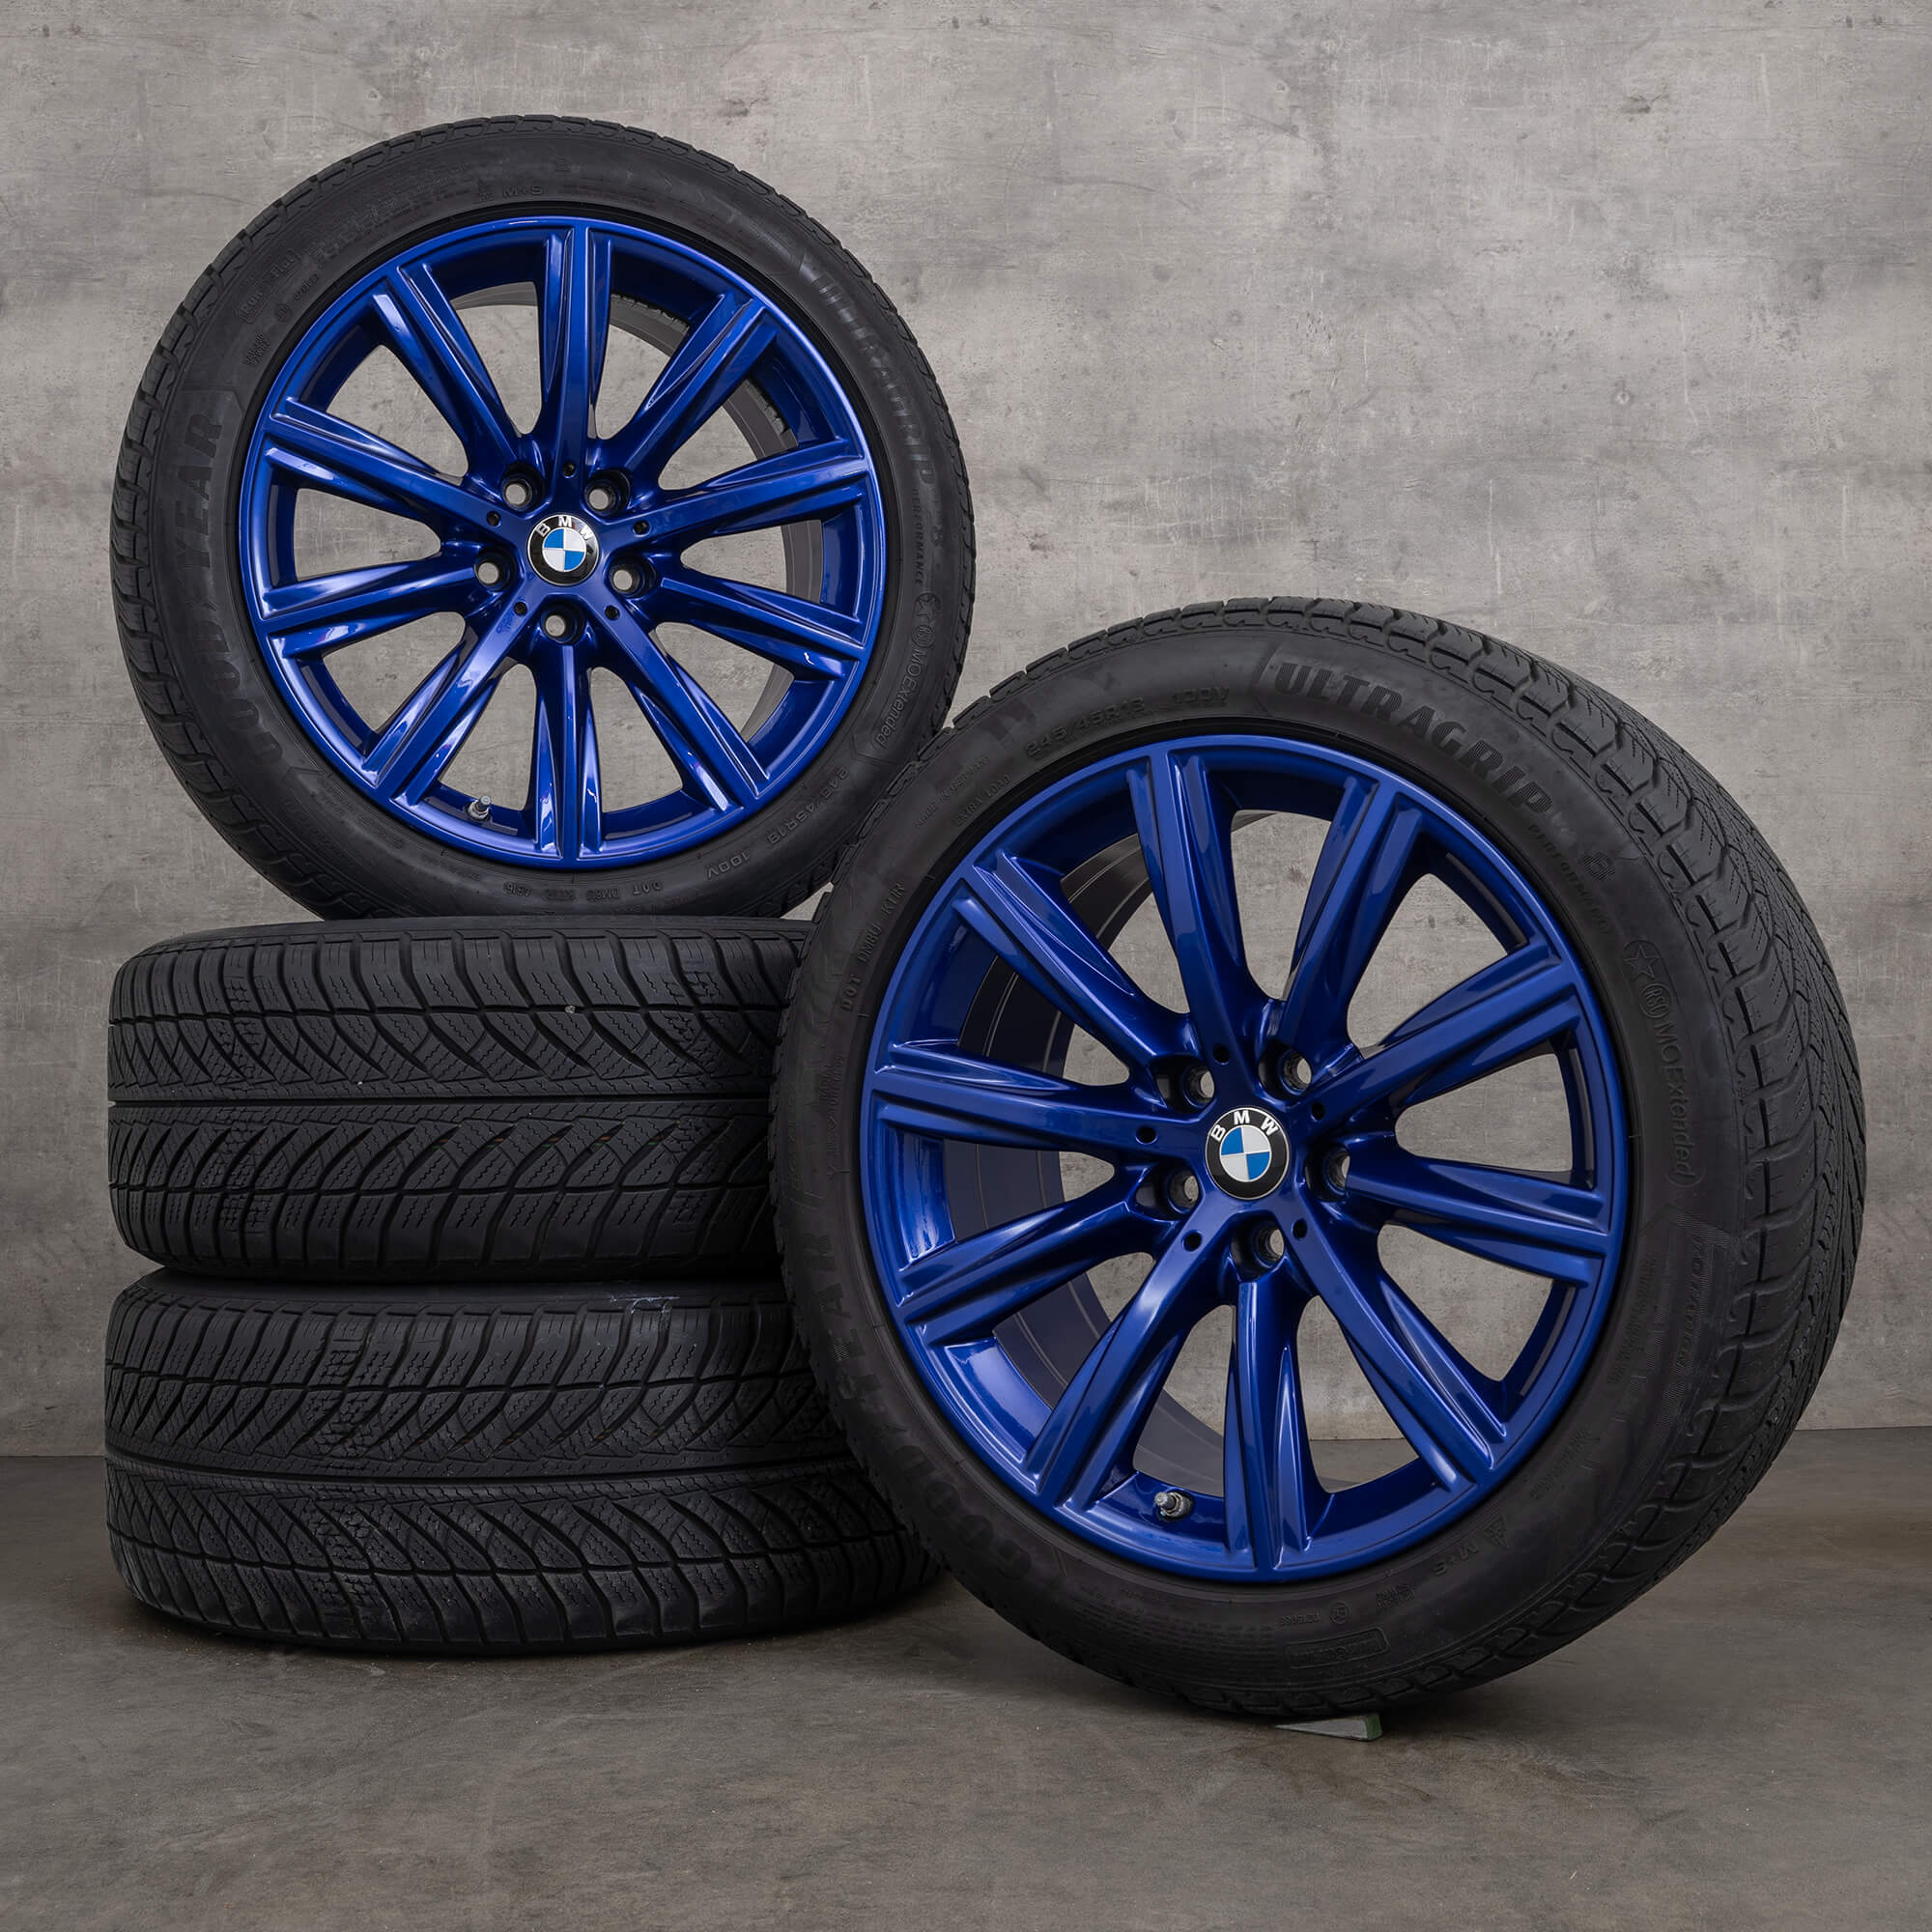 BMW 5 Series G30 G31 winter wheels 18 inch rims tires styling 684 6874441 blue